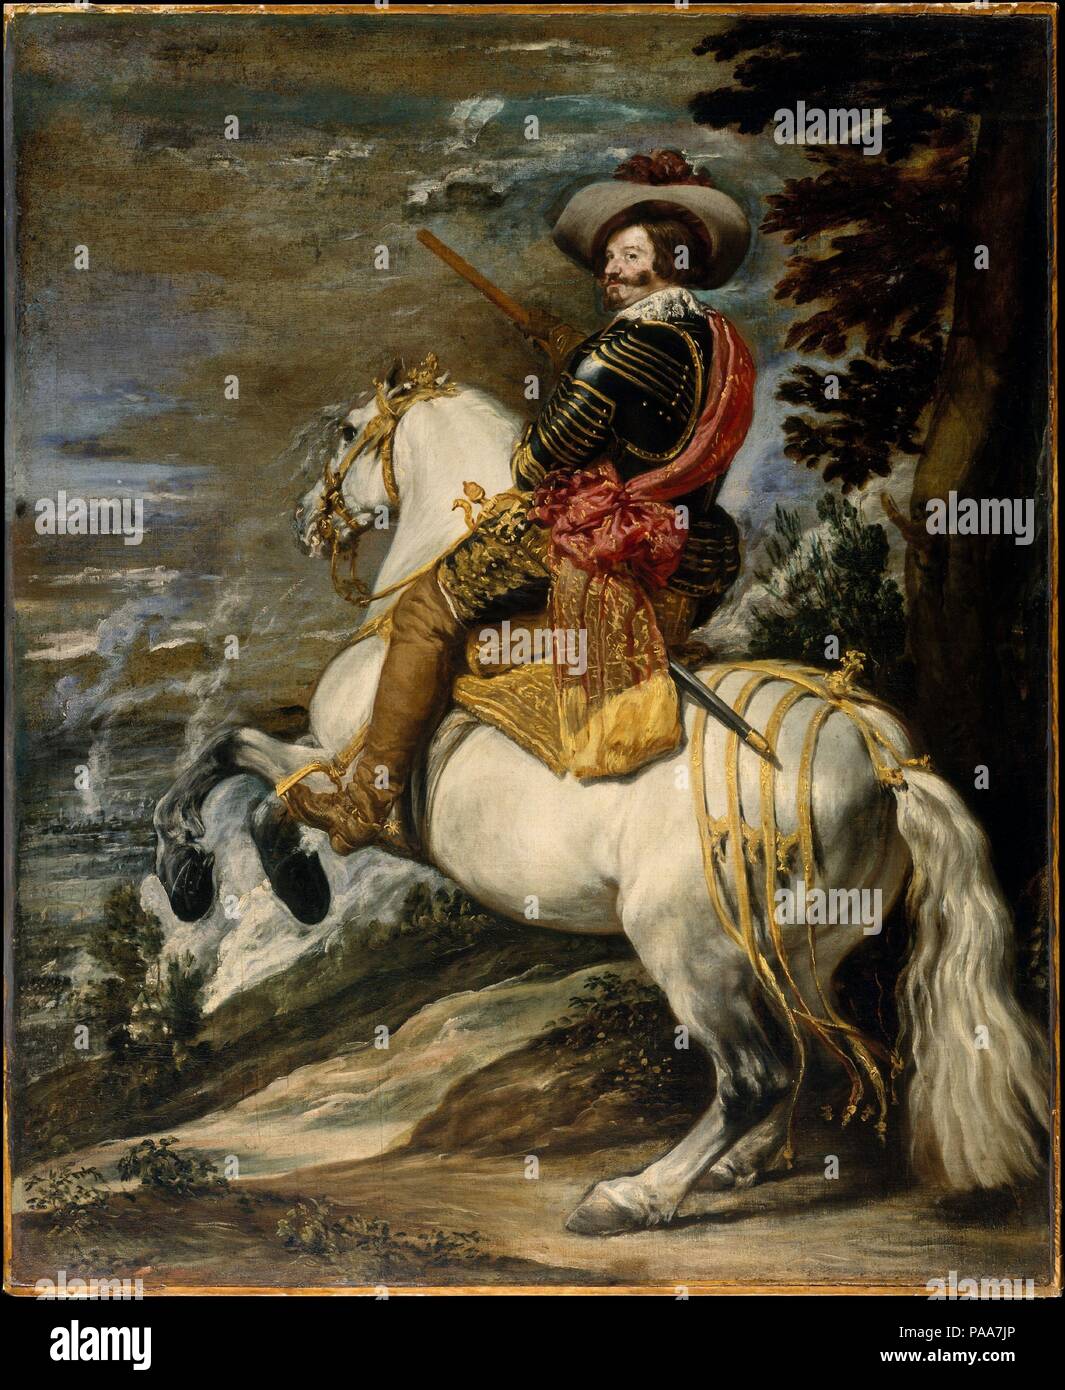 Don Gaspar de Guzmán (1587-1645), Count-Duke of Olivares. Artist: Attributed to Velázquez (Diego Rodríguez de Silva y Velázquez) (Spanish, Seville 1599-1660 Madrid); and/or Juan Bautista Martínez del Mazo (Spanish, Cuenca ca. 1612-1667 Madrid). Dimensions: 50 1/4 x 41 in. (127.6 x 104.1 cm). Date: ca. 1635.    The Count-Duke of Olivares was Philip IV's powerful prime minister between 1621 and 1643. This picture is either a preliminary model or a reduced variant of a large equestrian portrait of the count-duke (Prado, Madrid), painted perhaps in celebration of a victory over the French at the b Stock Photo